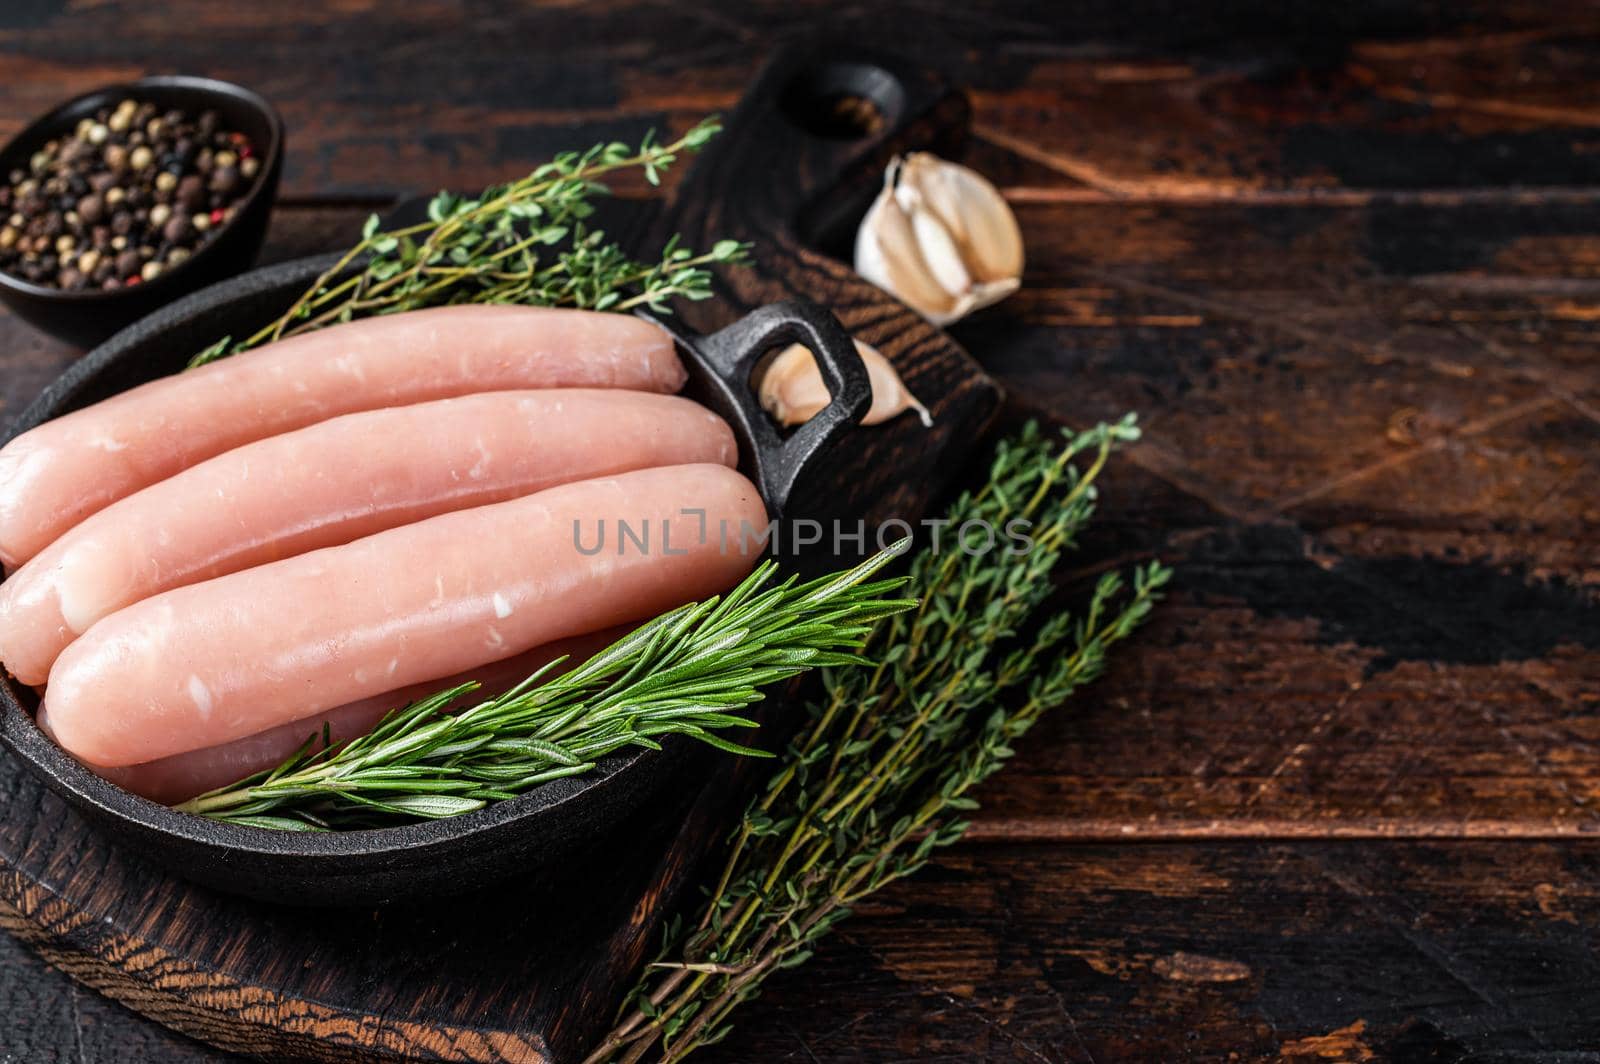 Pork raw sausages in a pan with herbs. Dark wooden background. Top view. Copy space by Composter